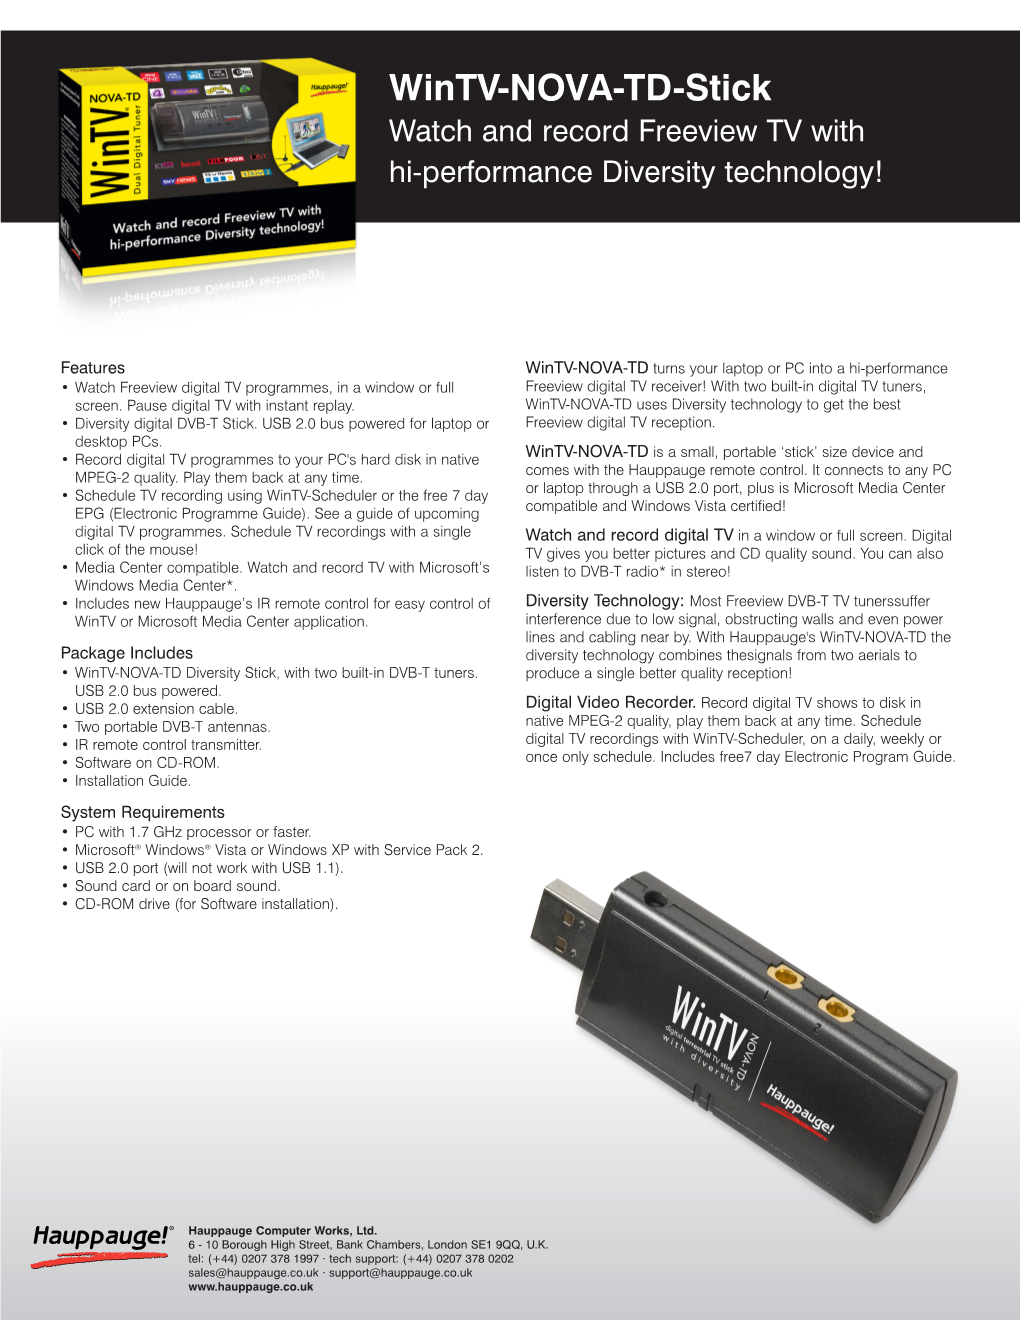 Wintv-NOVA-TD-Stick Watch and Record Freeview TV with Hi-Performance Diversity Technology!